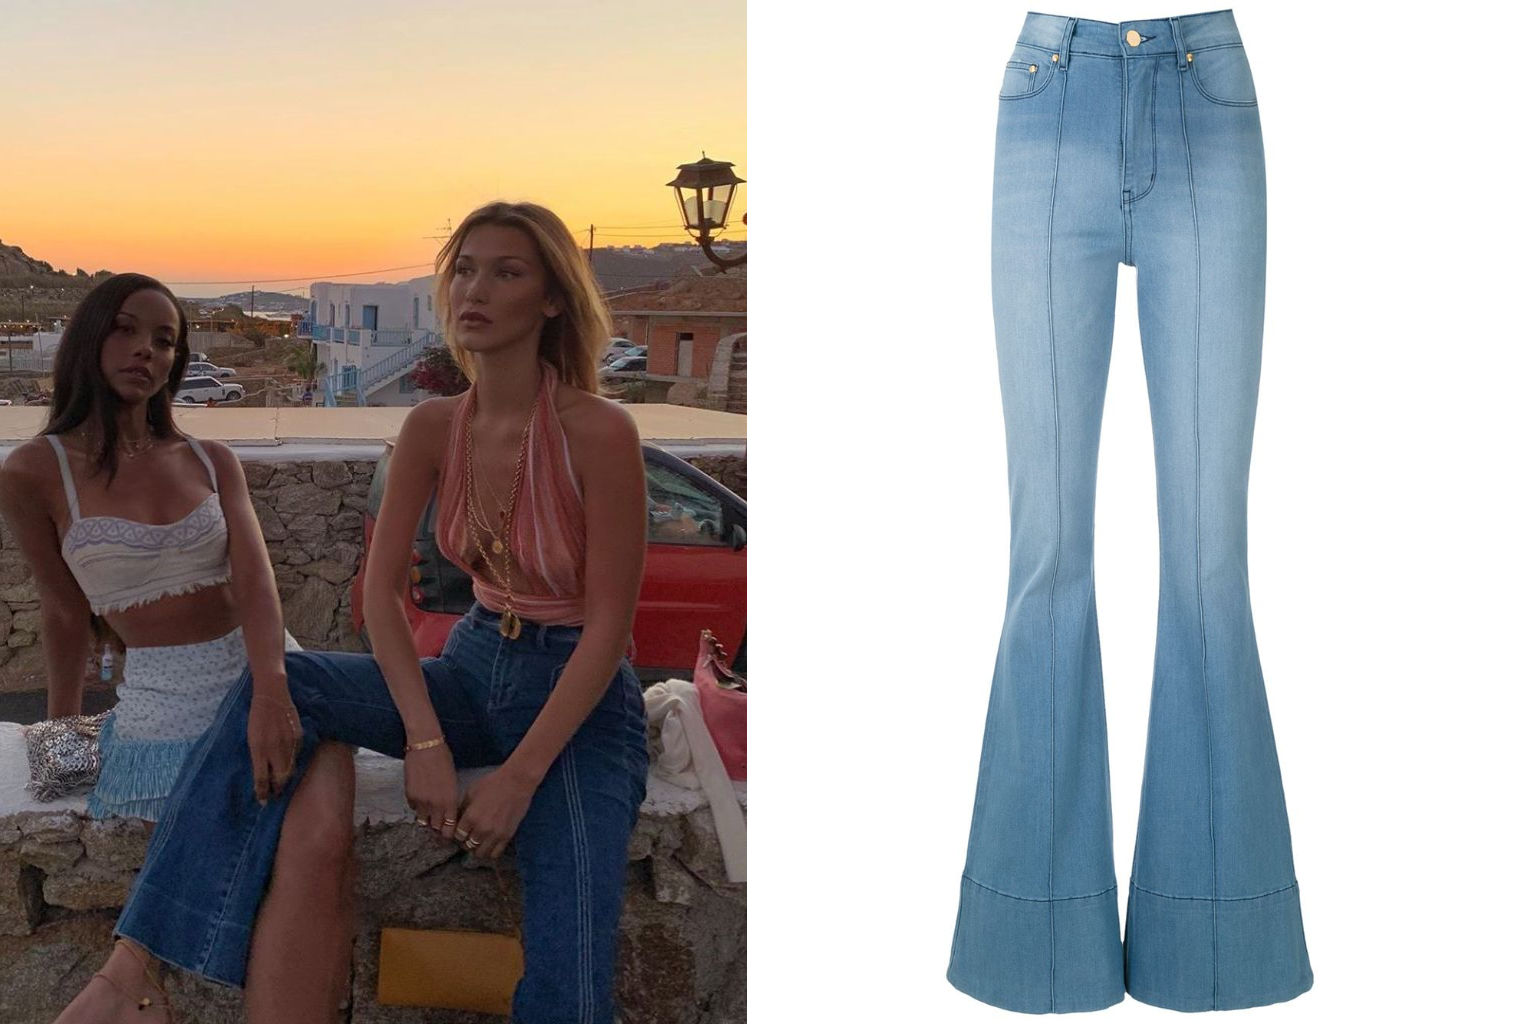 Lender despise Dismantle The 70s denim trend is back! Here's how to wear and flaunt flare jeans